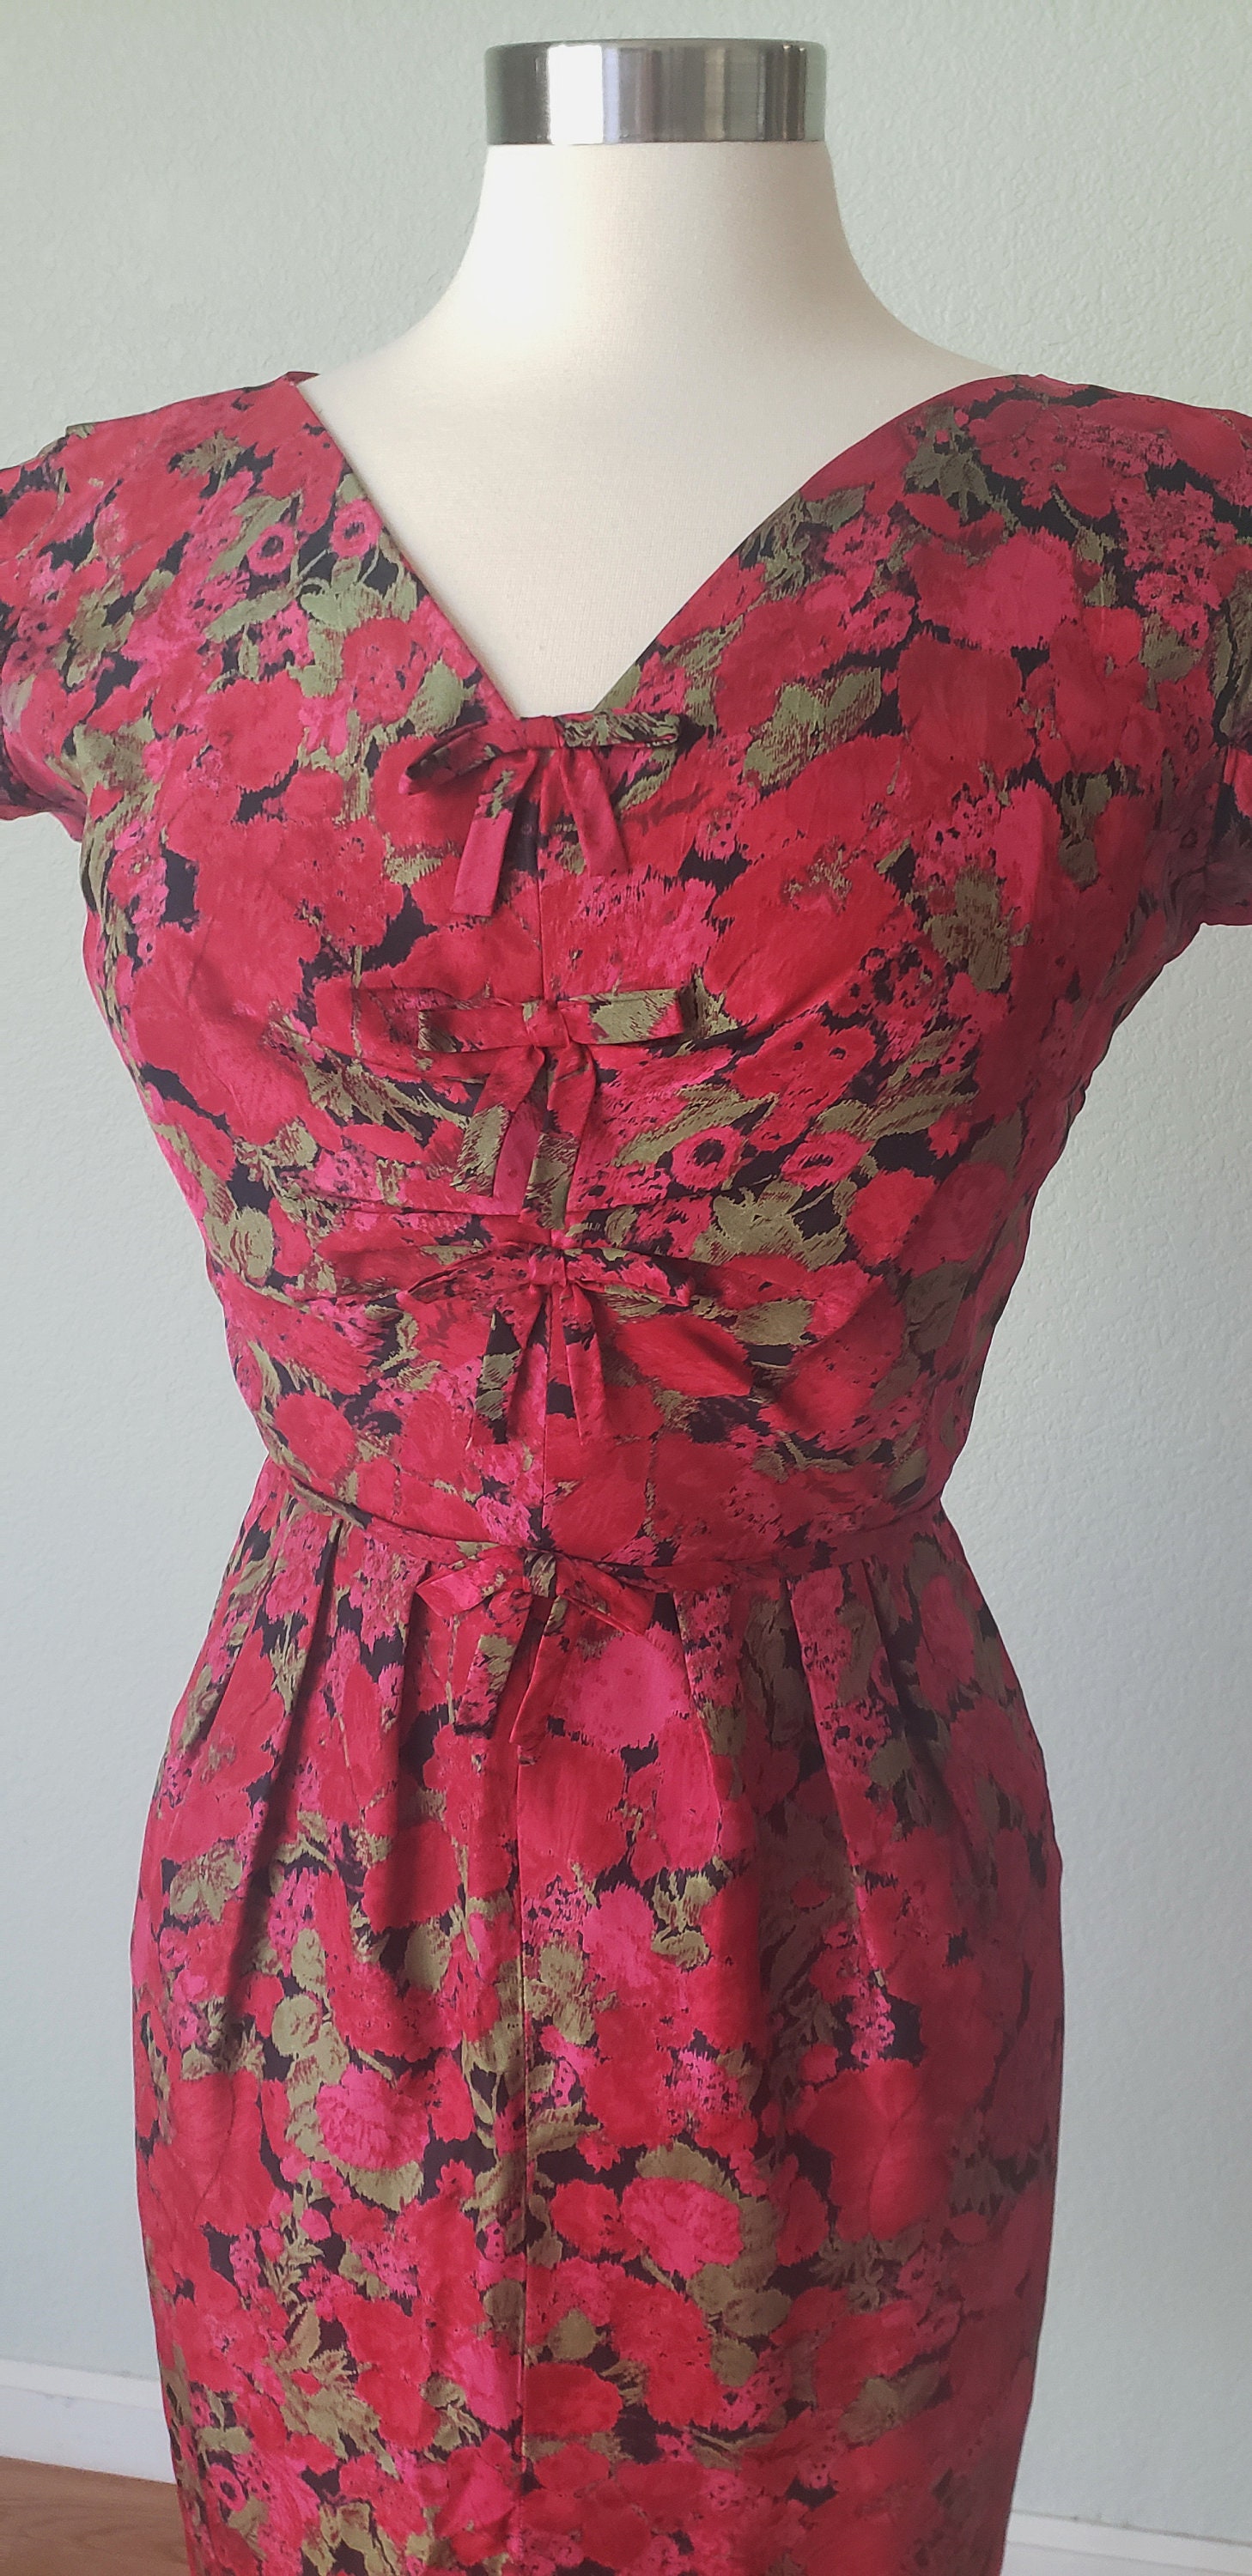 1950s-60s Silk Floral Wiggle Dress with Ruched Bust / 1950s | Etsy